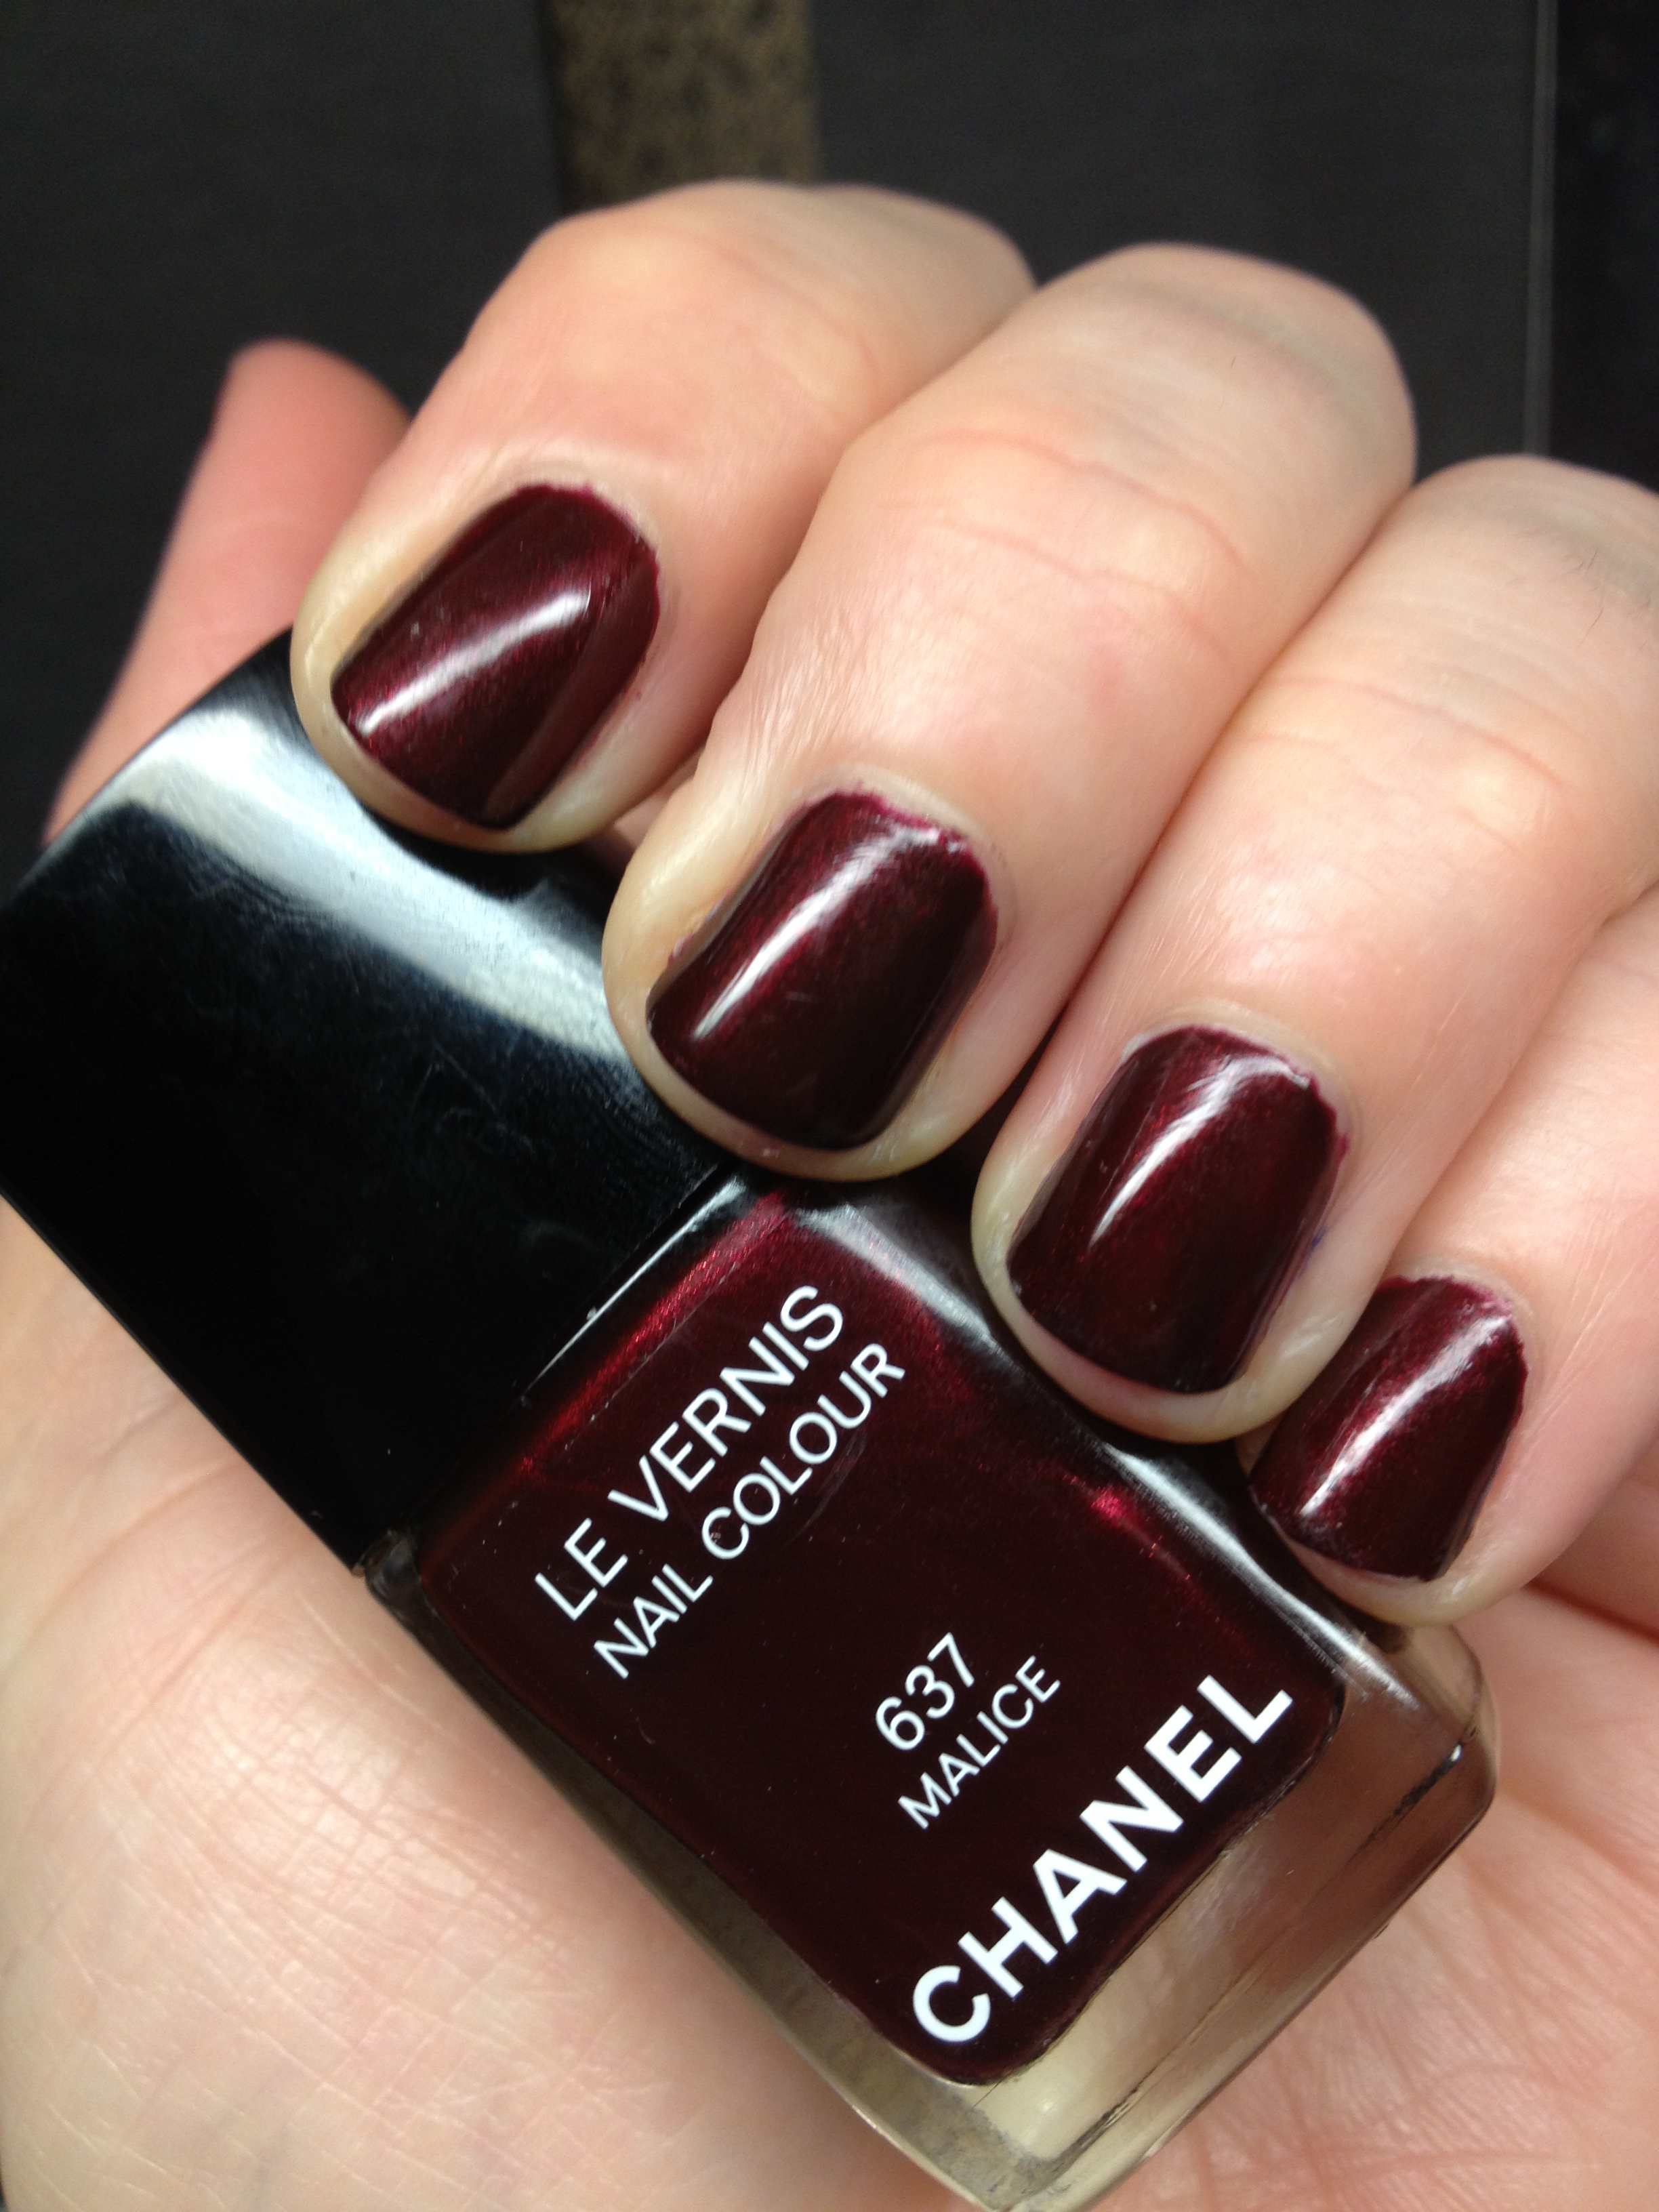 The Vamp Files – Chanel Le Vernis Rouge Noir 18, Malice 637